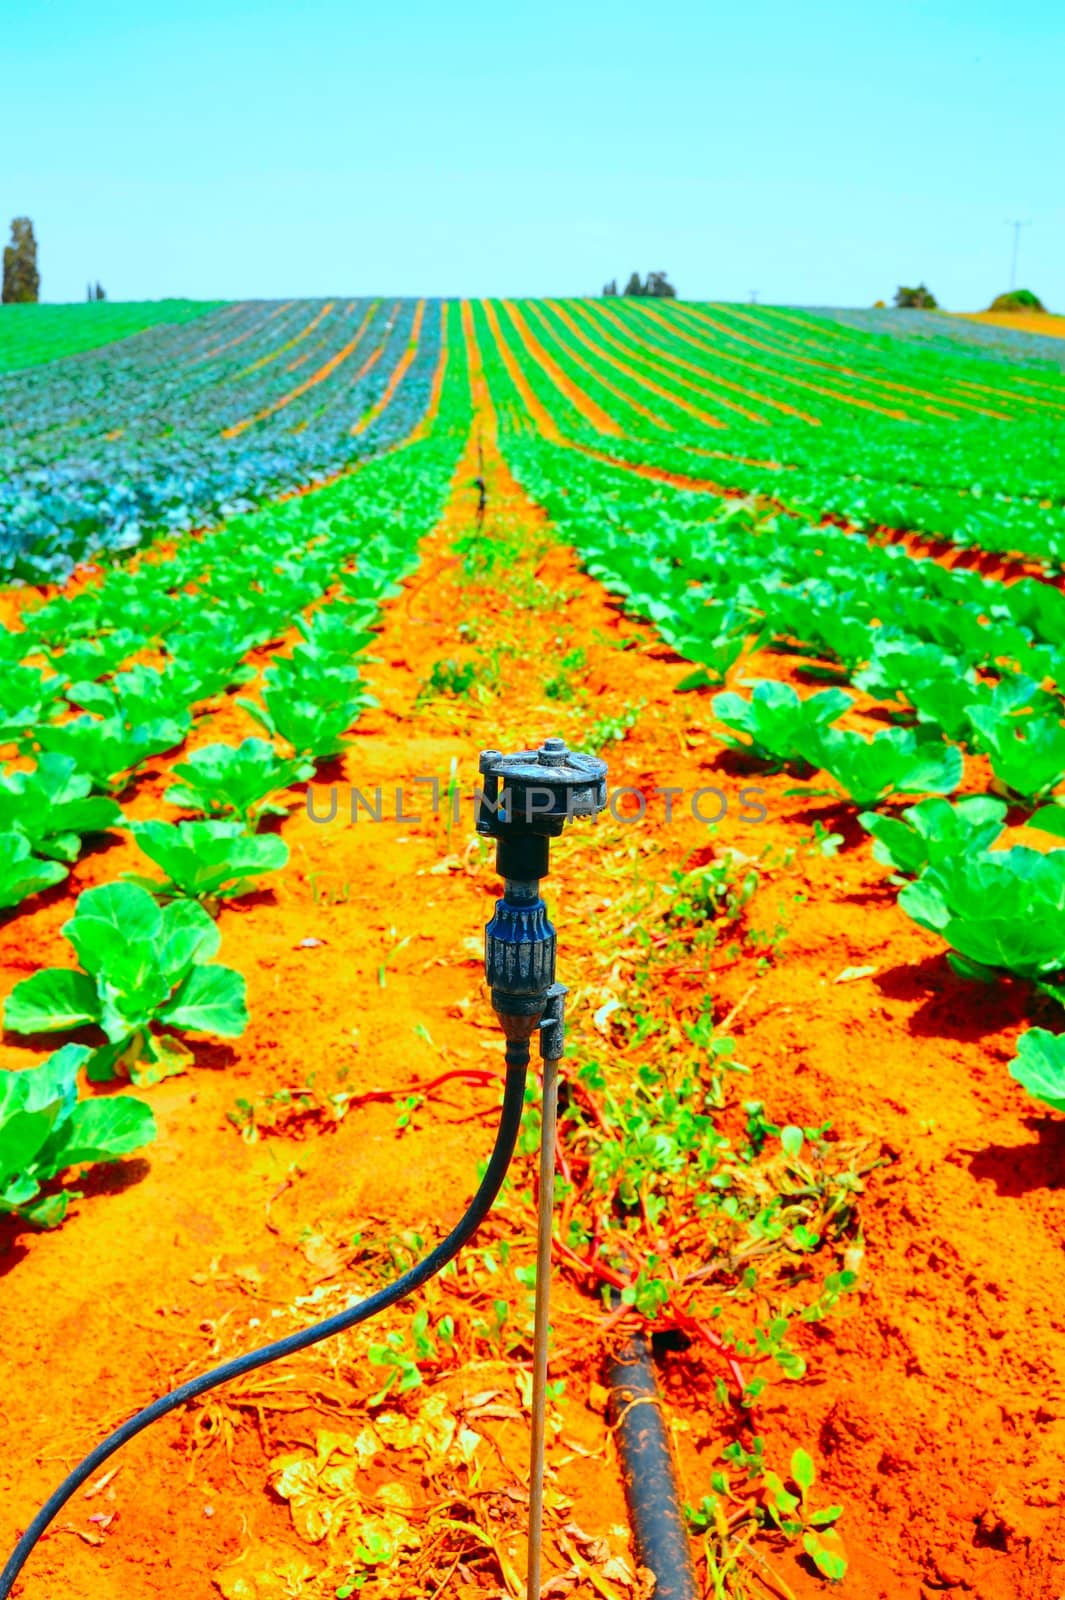 Water Sprinkler and Rows of Fresh Young Cabbage Plants